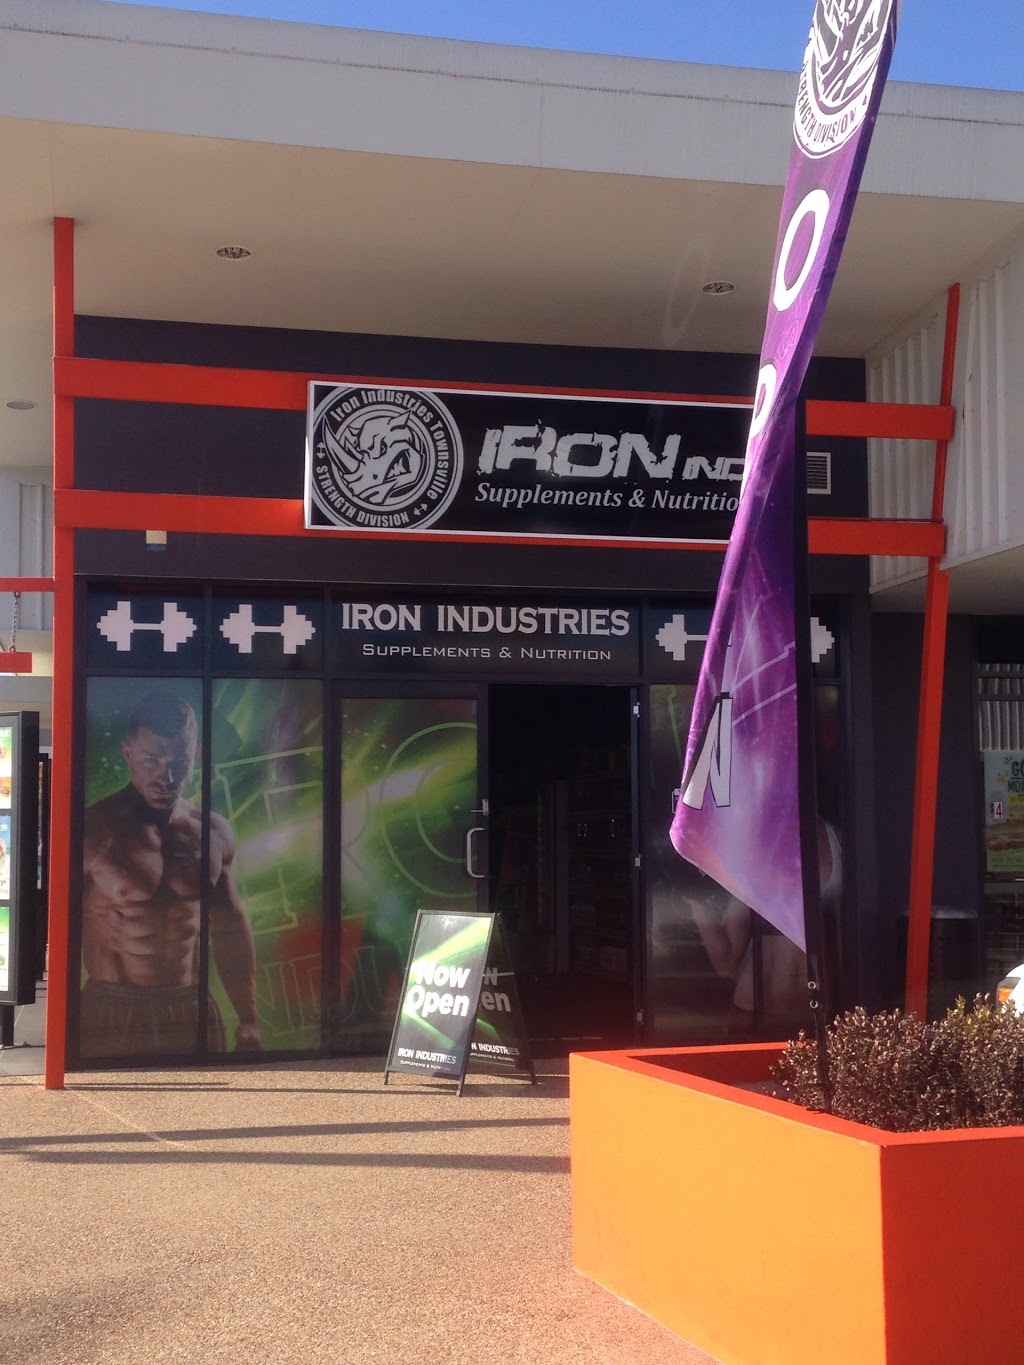 Iron Industries Townsville (Supplements & Nutrition) | store | Shop 11 Northside Square, 2-10 Deeragun Rd, Townsville QLD 4818, Australia | 0747519714 OR +61 7 4751 9714